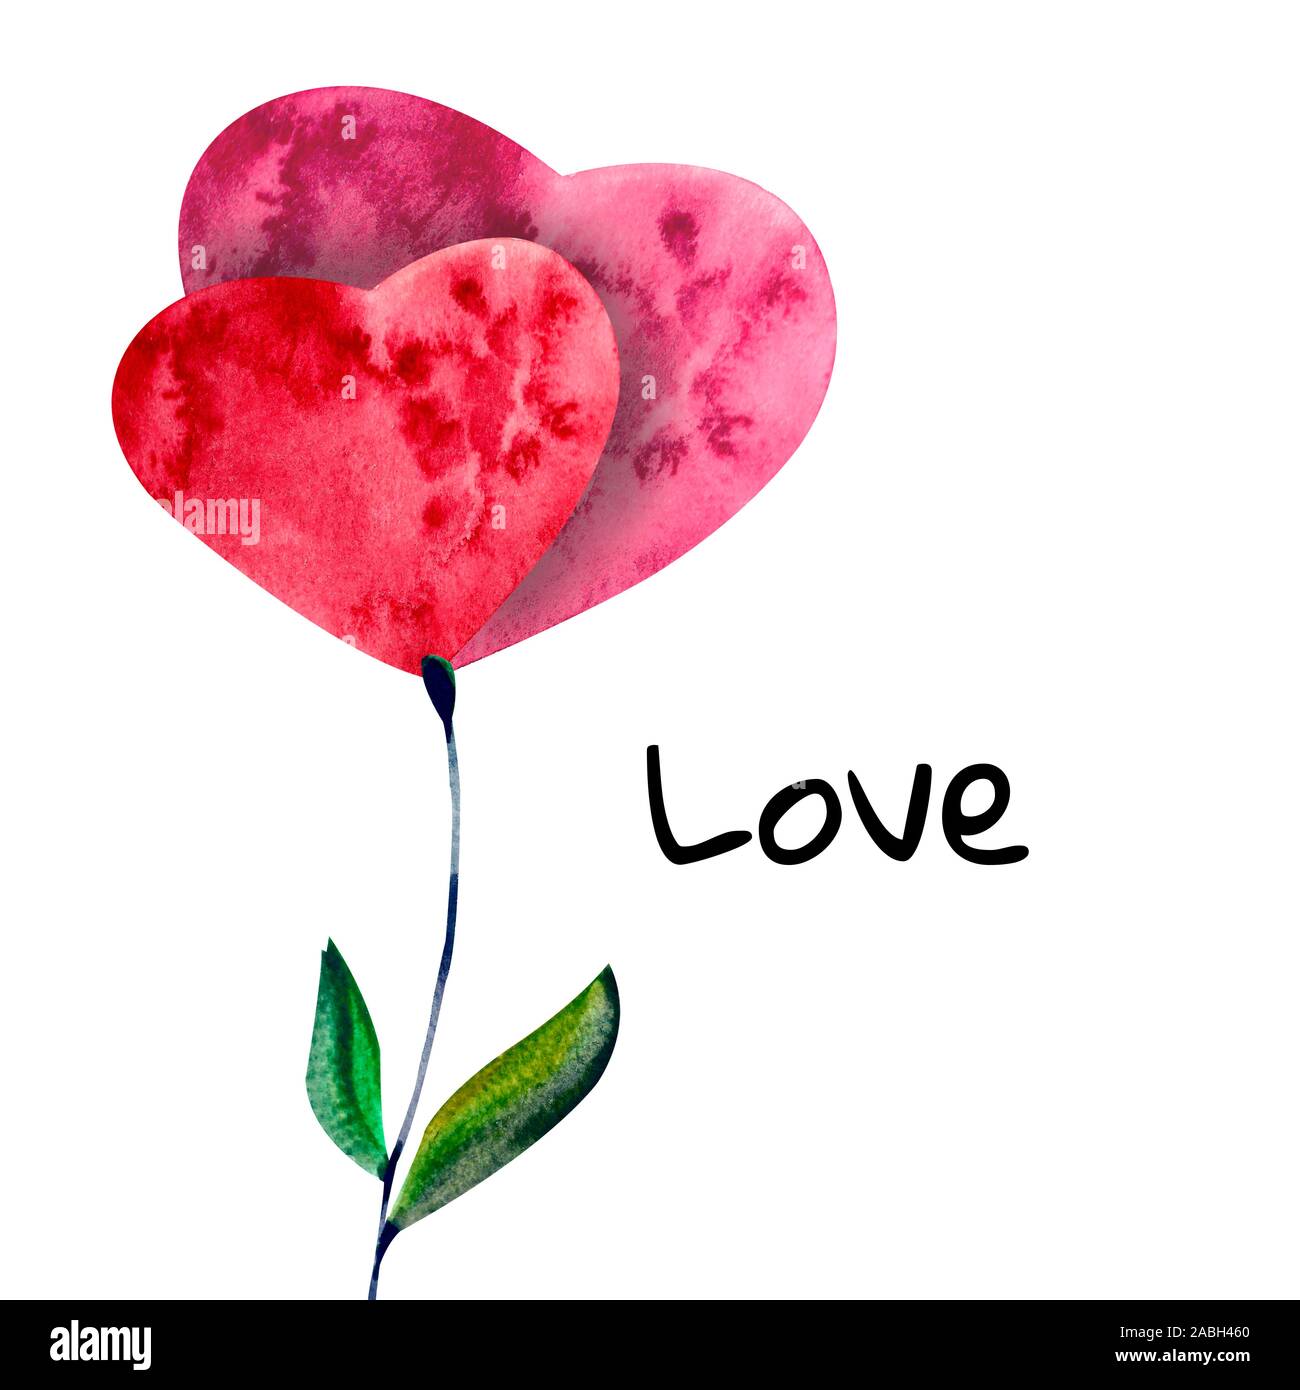 Watercolor Red And Pink Hearts Concept Love Flower Painting Stock Photo Alamy